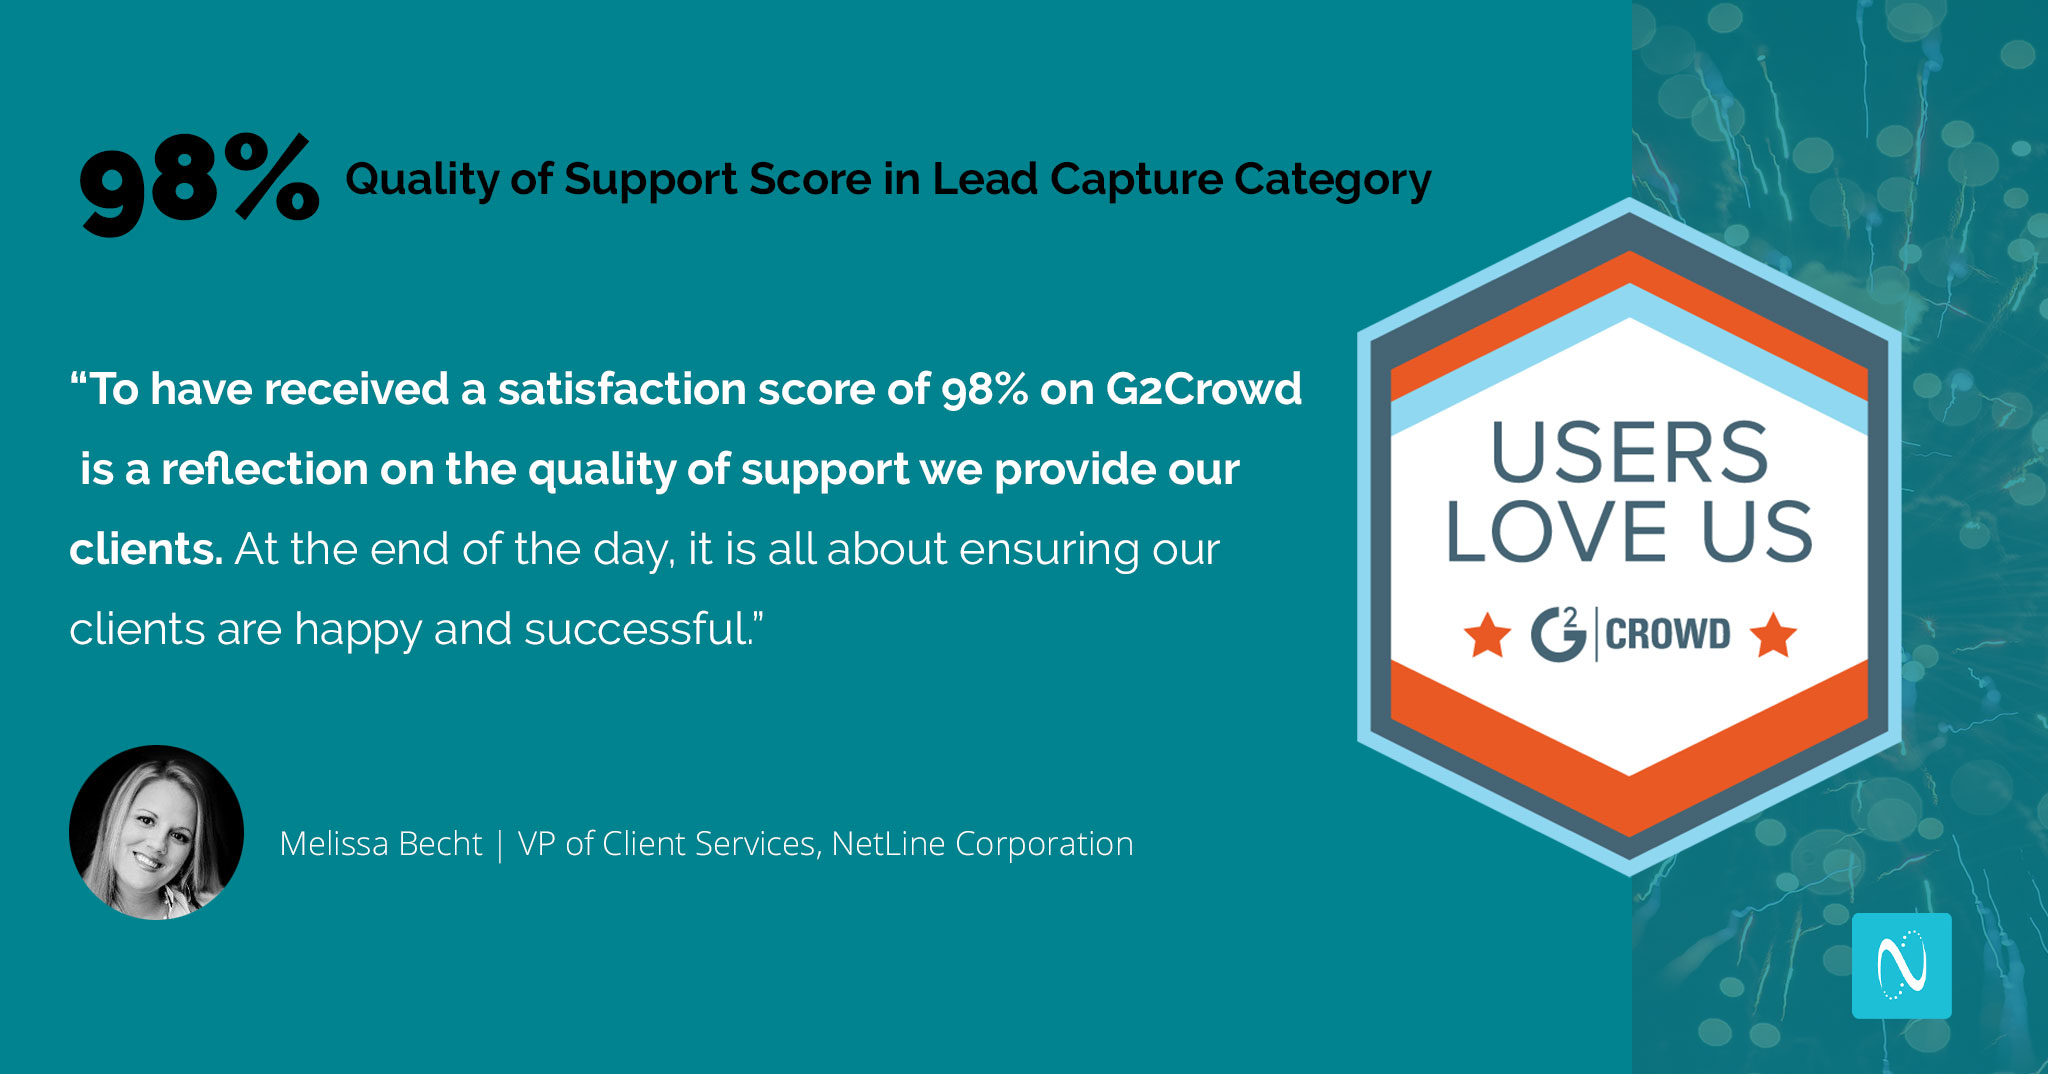 Melissa Becht shares NetLine Corporation's gratitude for our Fall 2019 G2 Crows Satisfaction Score of 98%.